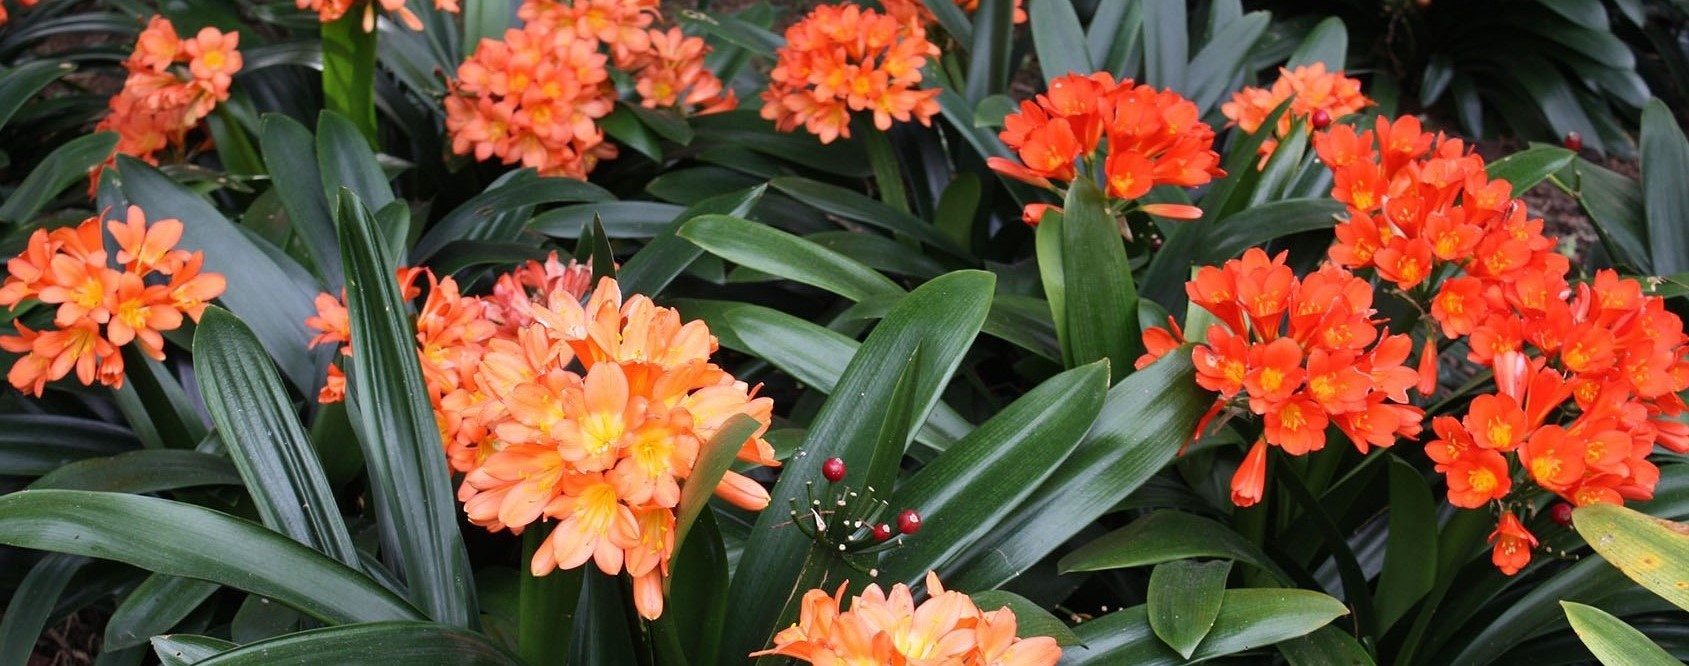 12-astounding-facts-about-clivia